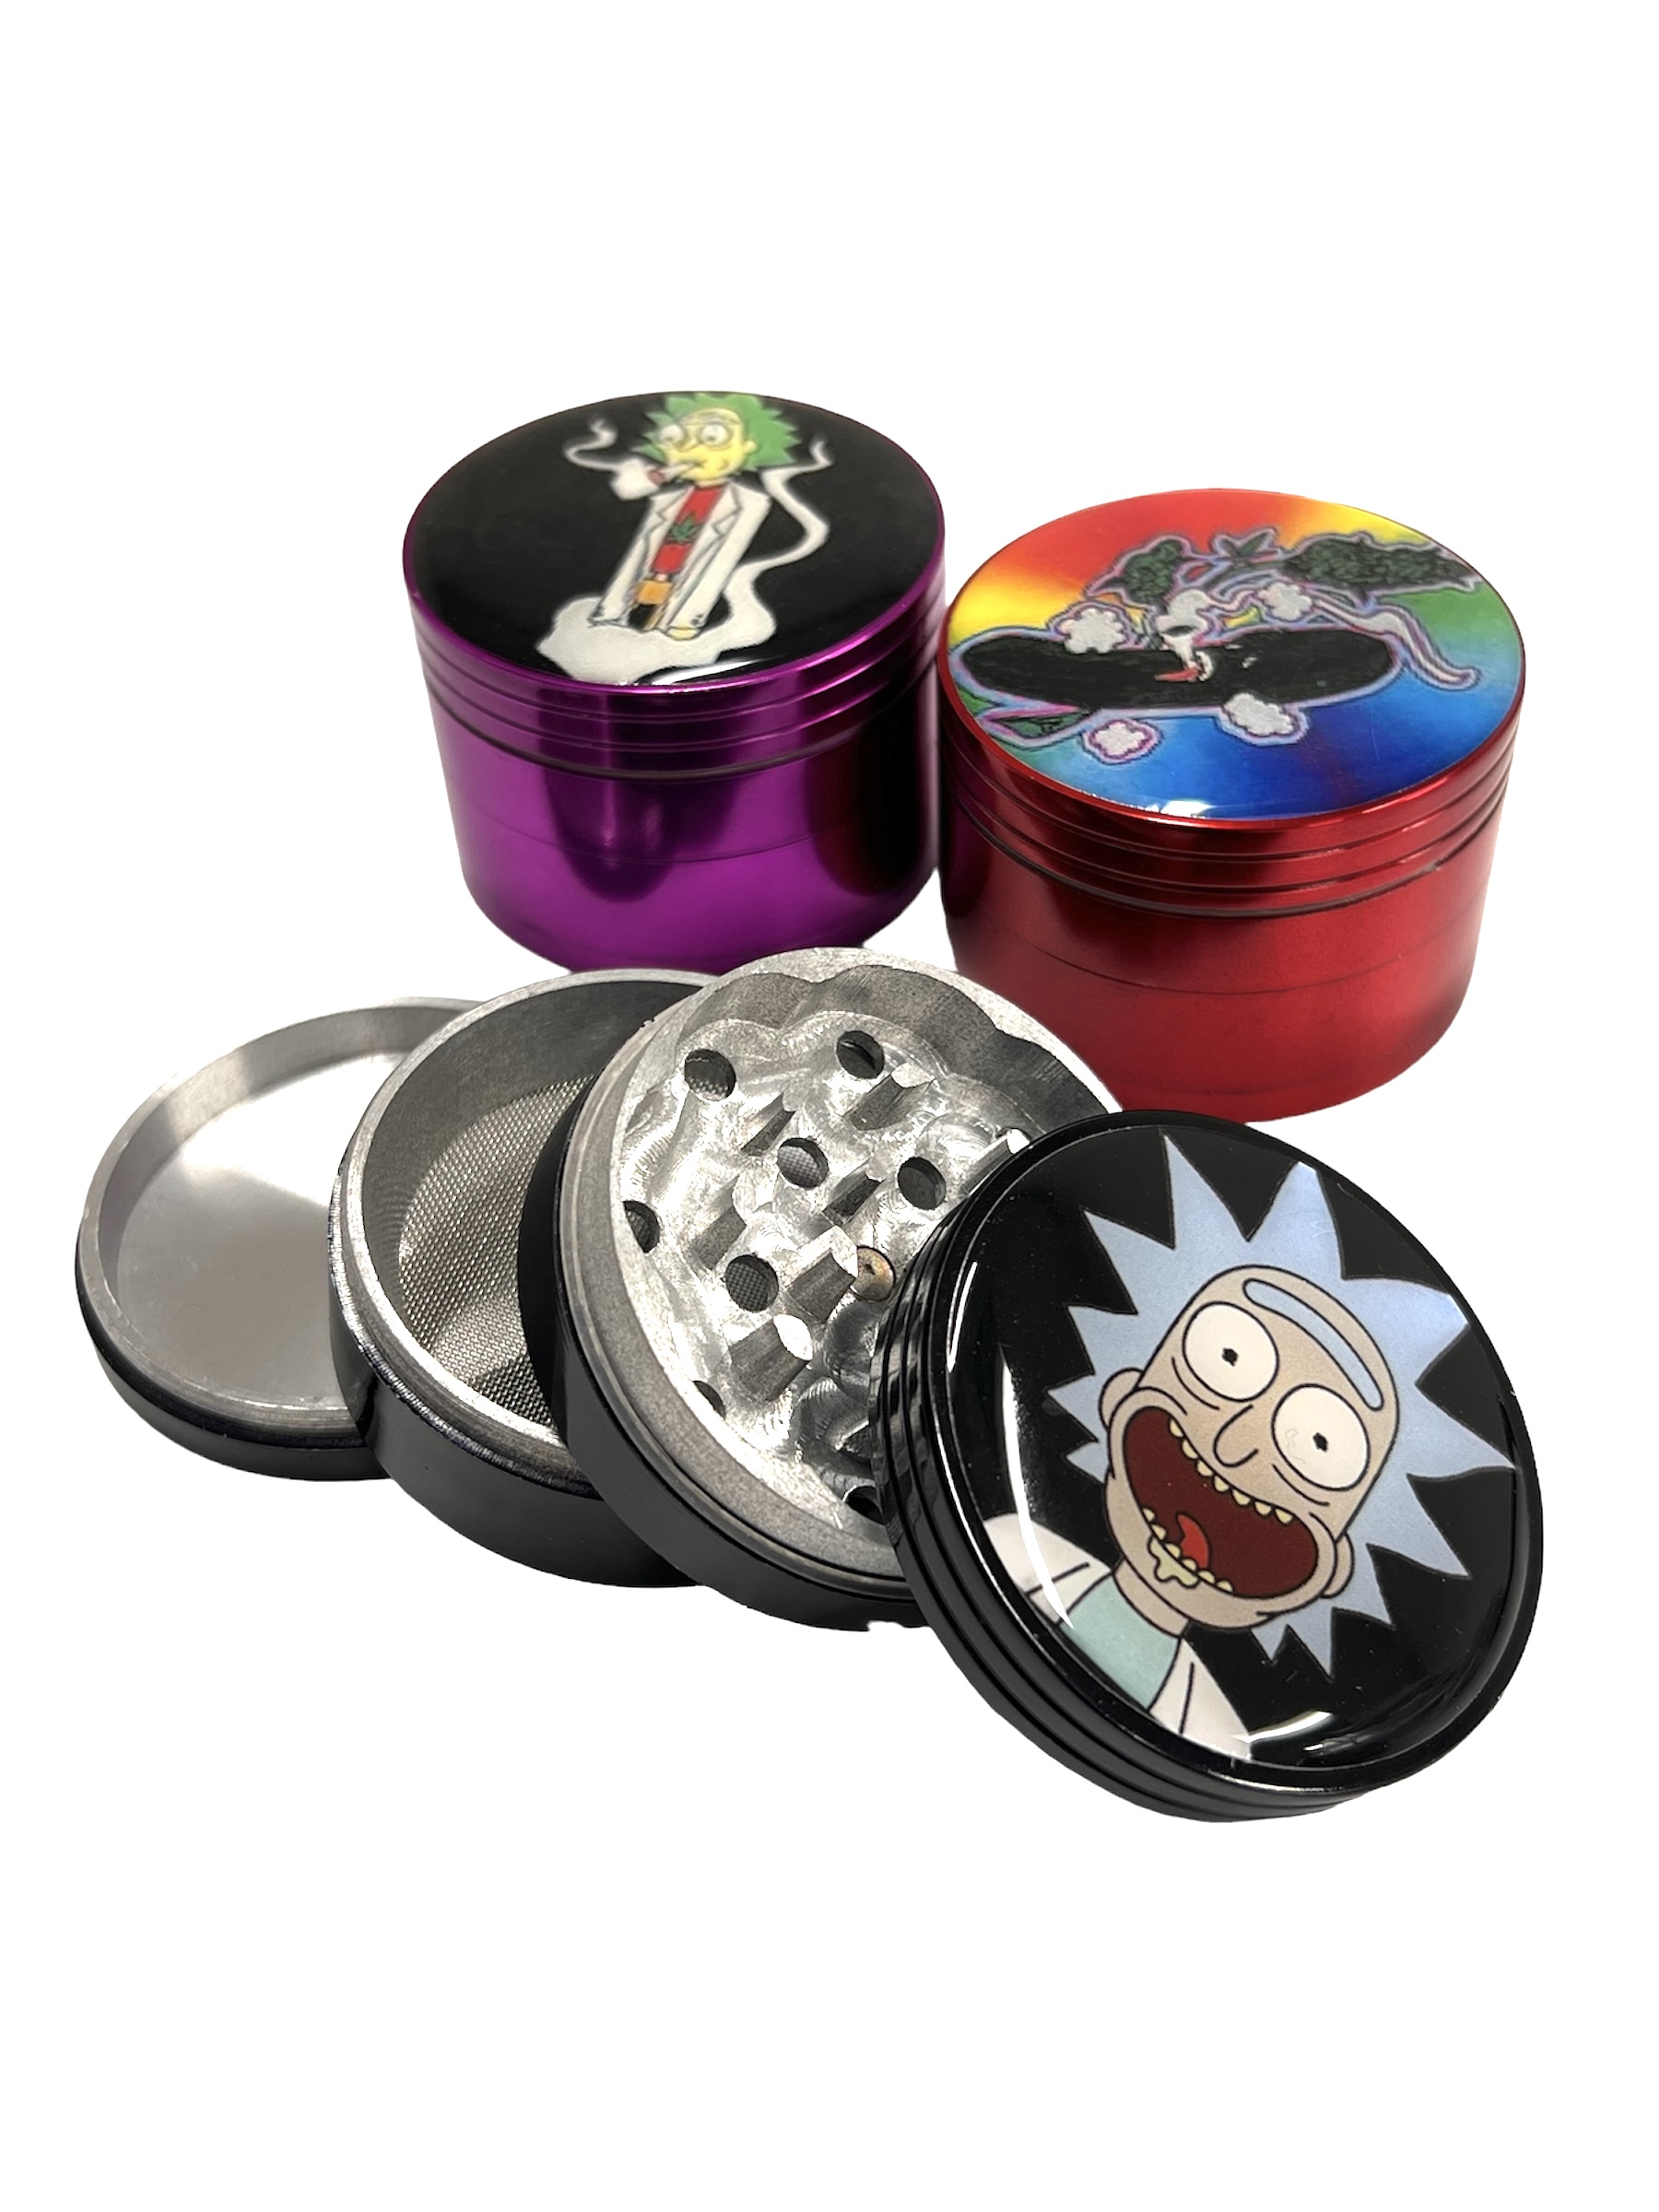 Rick & Morty Rick & Morty Grinder Rolling Papers & Supplies